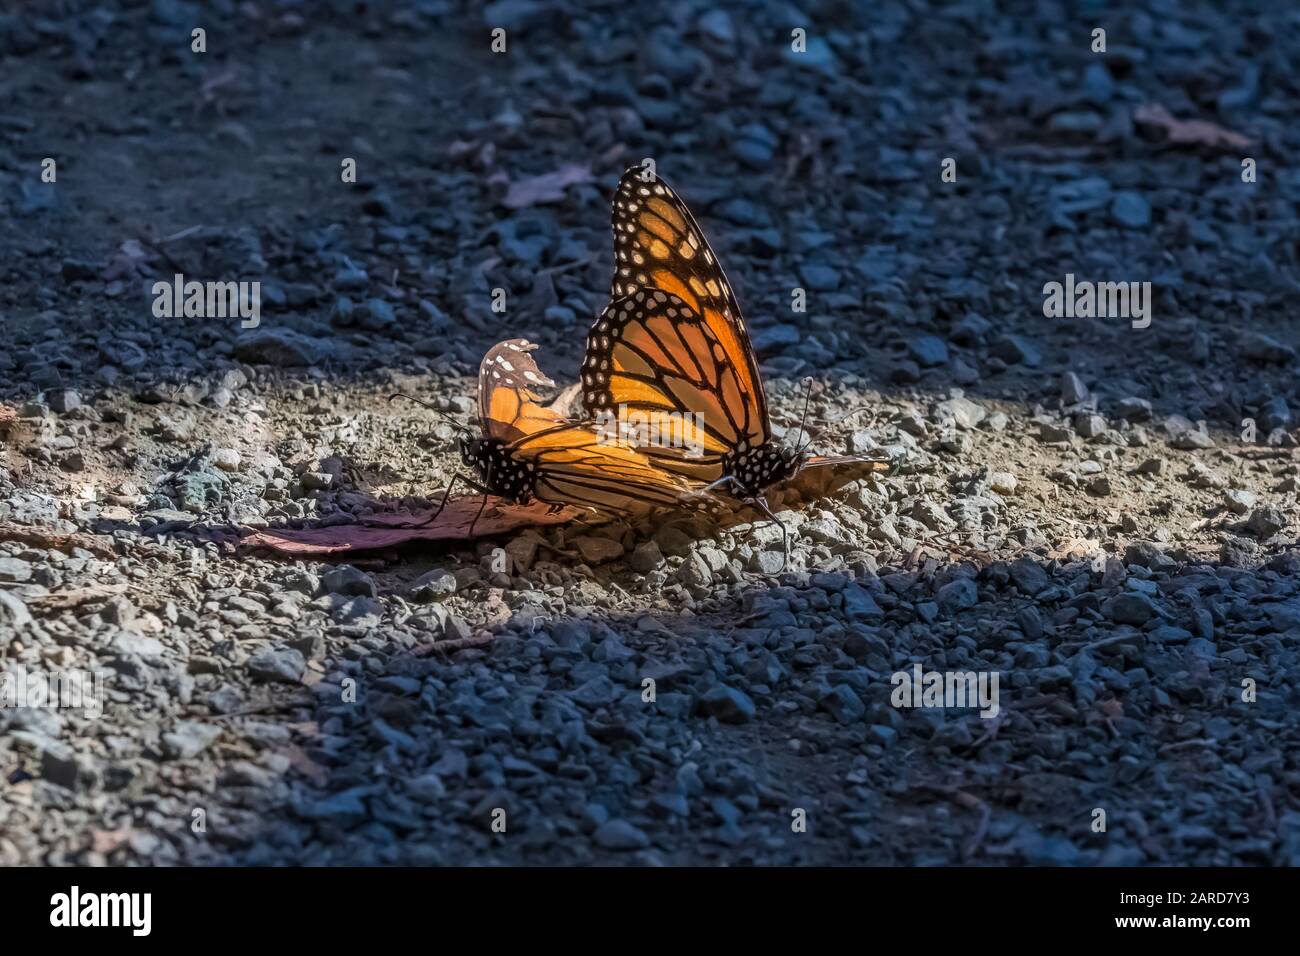 Pair of Monarch Butterflies, Danaus plexippus, engaging in courtship at the Pismo Beach Monarch Butterfly Grove, later, the male picked up and flew aw Stock Photo